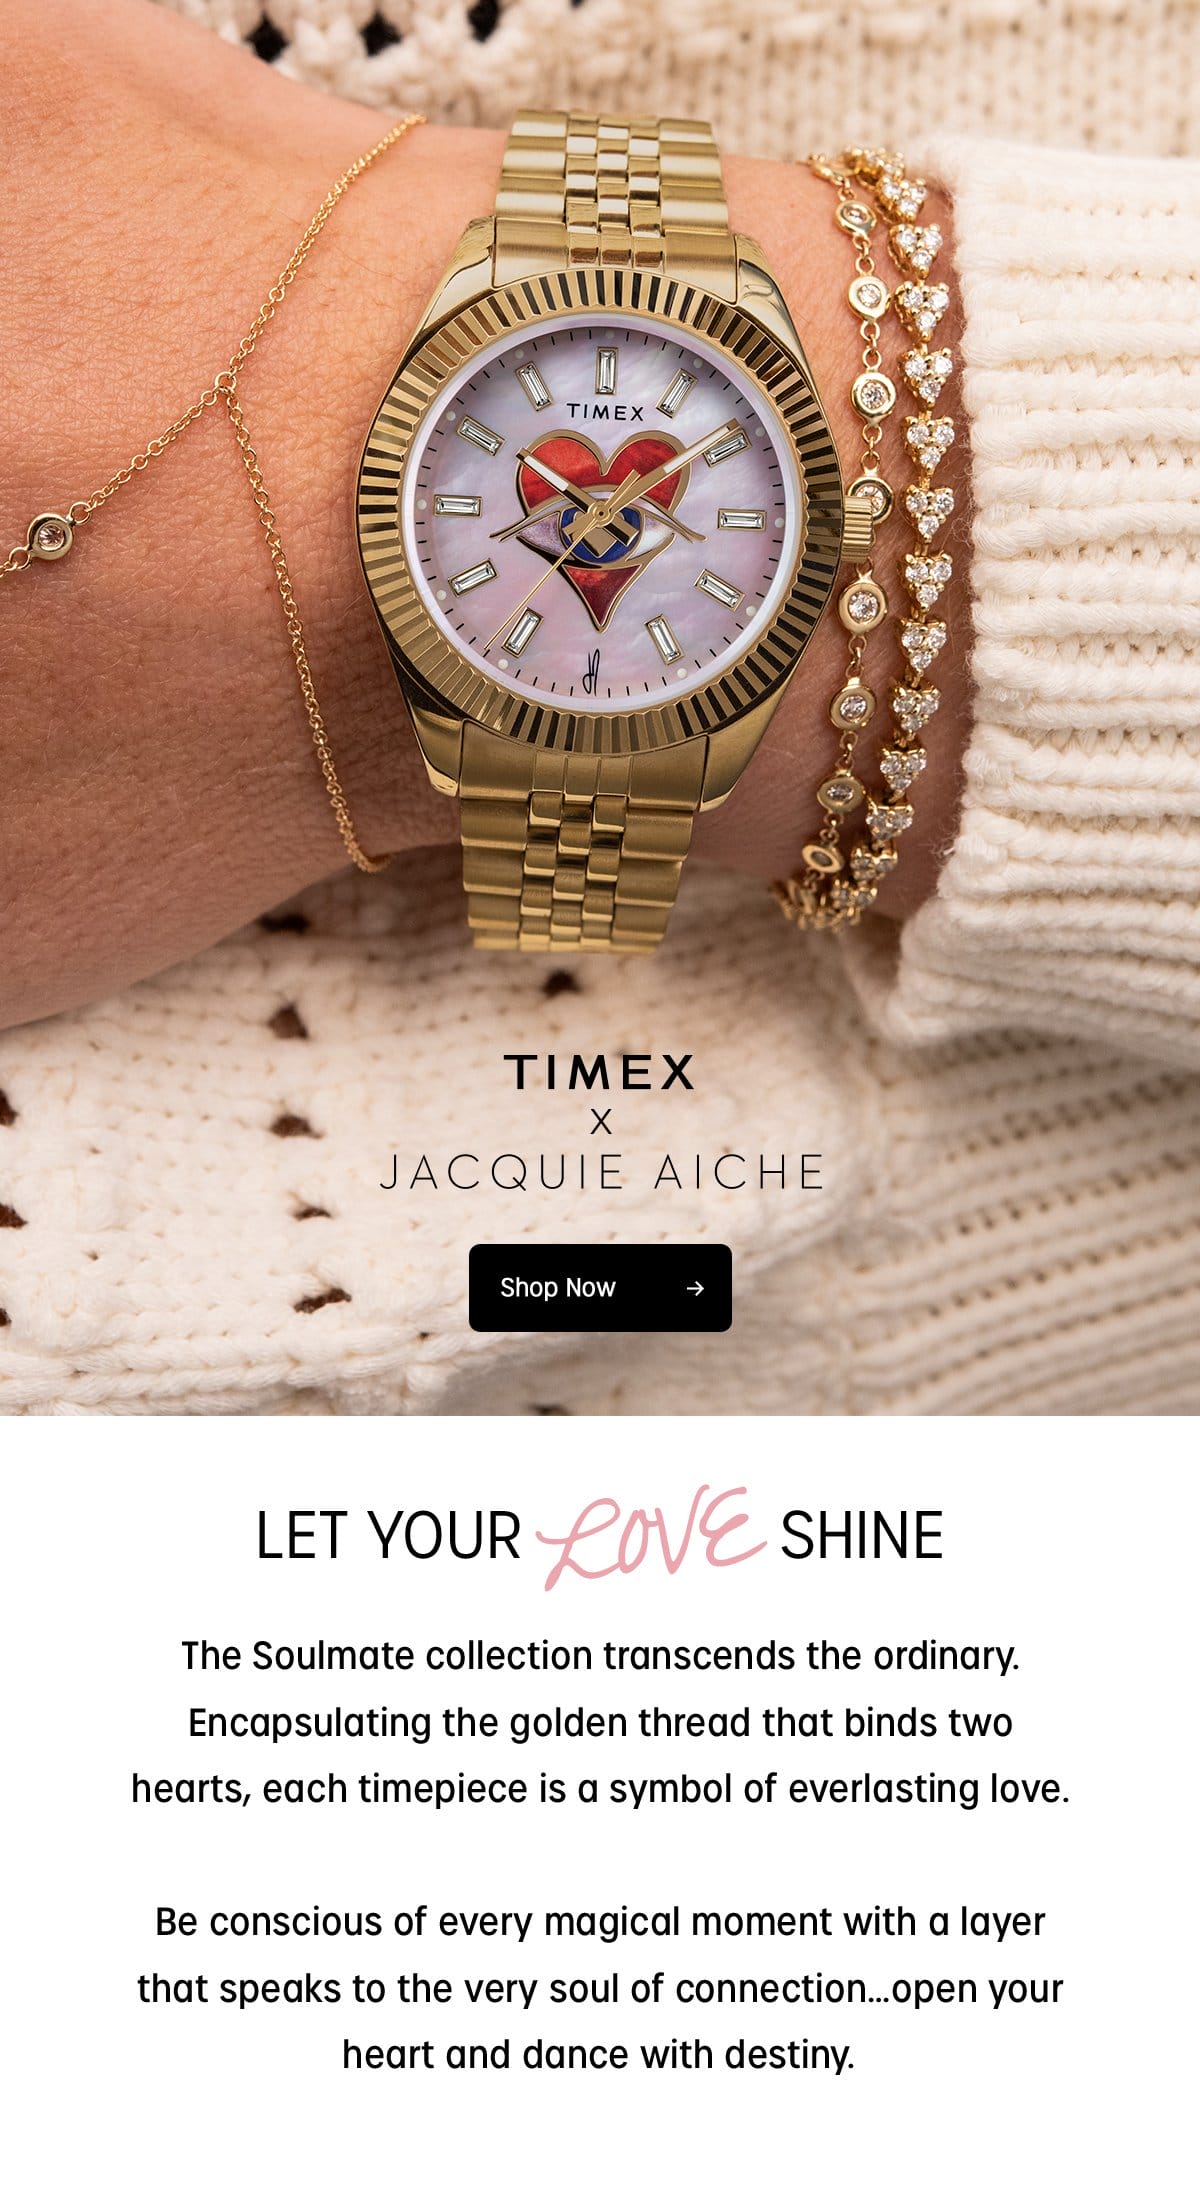 TIMEX x JACQUIE AICHE | Shop Now | LET YOUR LOVE SHINE | The Soulmate collection transcends the ordinary. Encapsulating the golden thread that binds two hearts, each timepiece is a symbol of everlasting love. Be conscious of every magical moment with a layer that speaks to the very soul of connection..open your heart and dance with destiny.